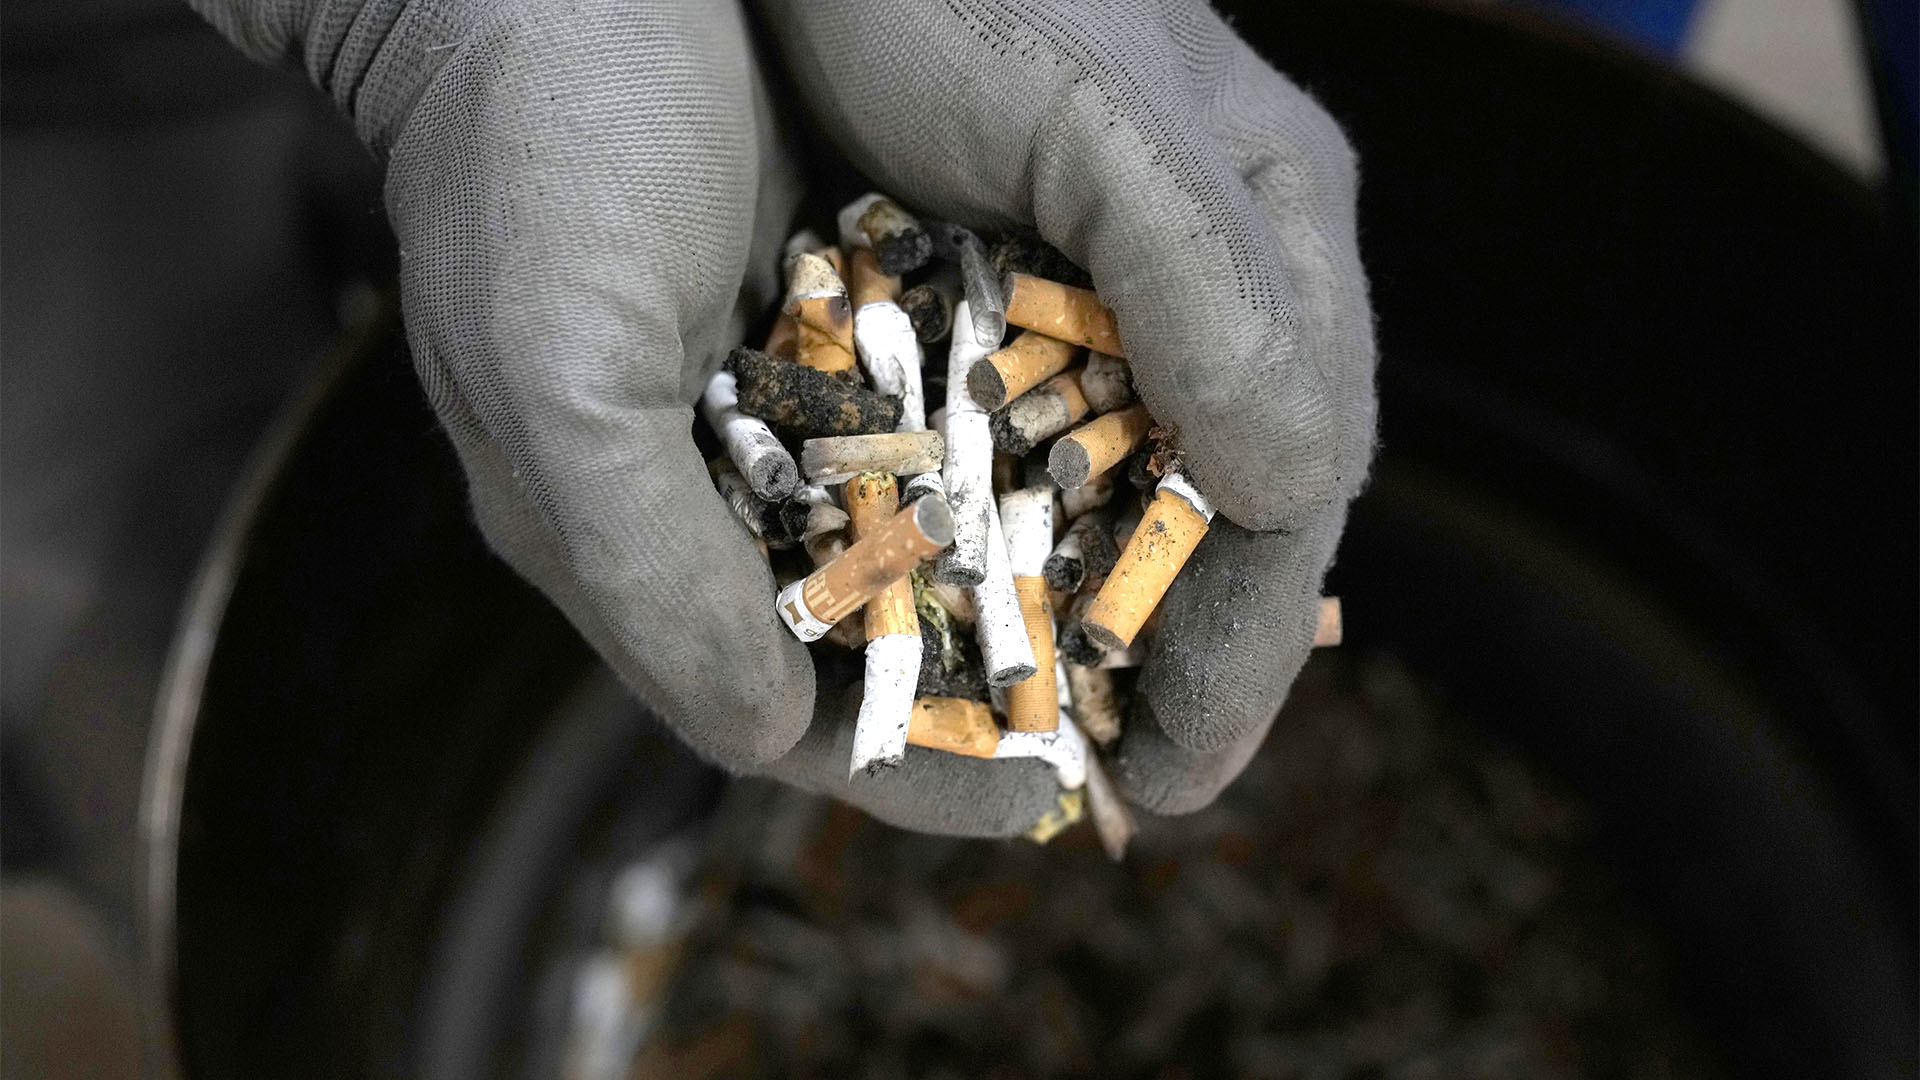 Cigarette butts collected for recycling (AP Photo/Thanassis Stavrakis)